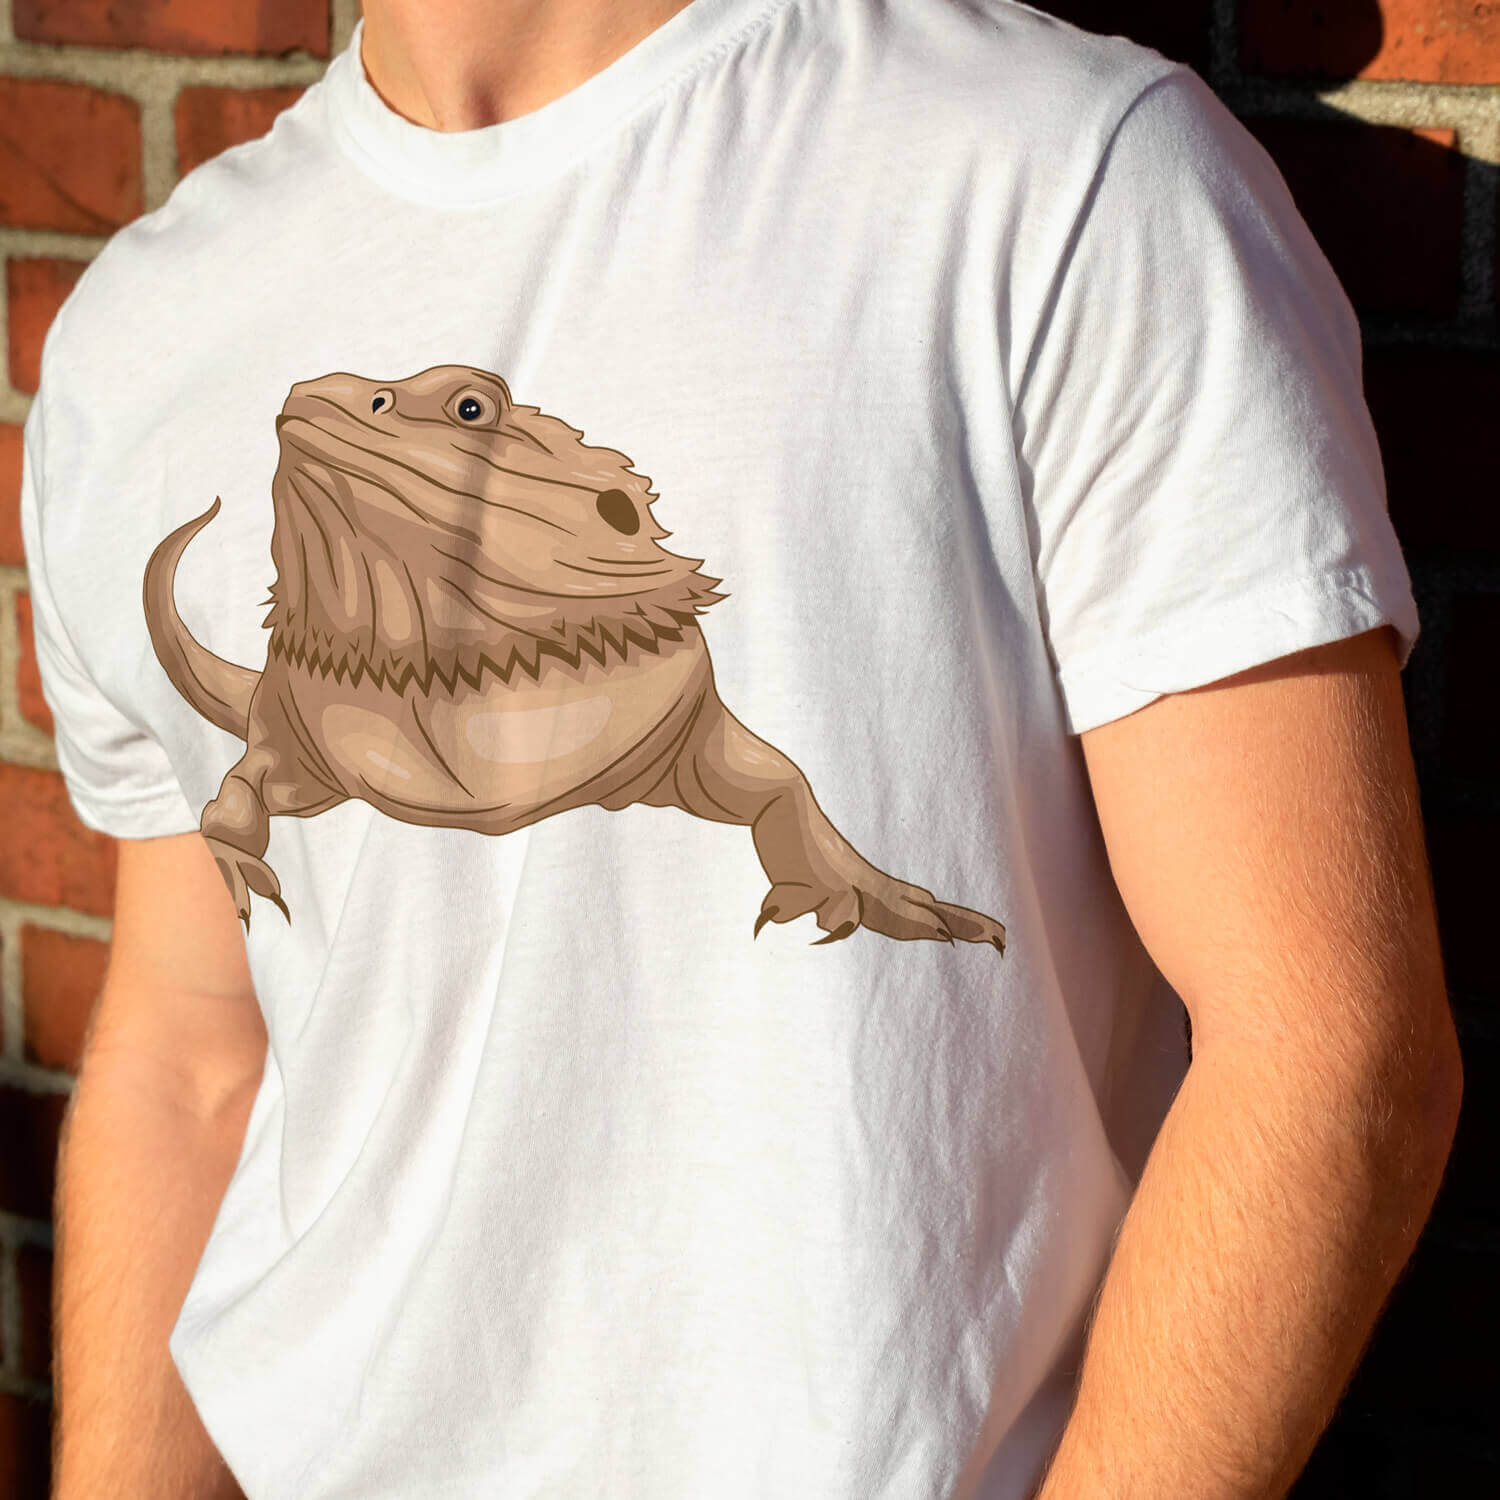 A huge bearded dragon is drawn on a white T-shirt.